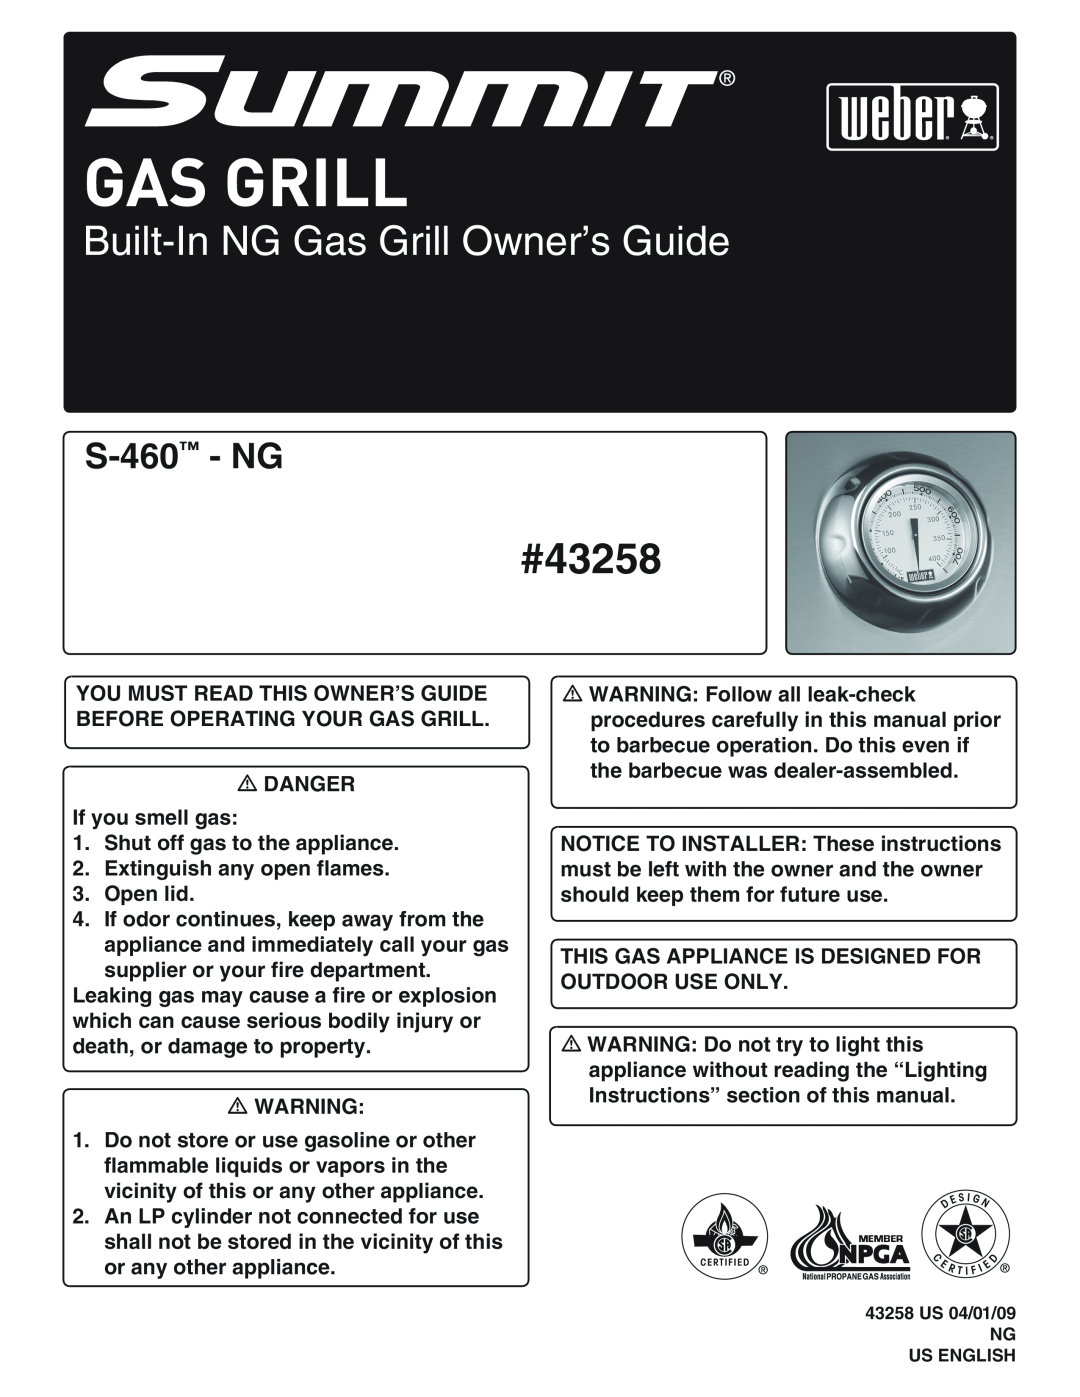 Weber manual #00000, #43258, Built-InNG Gas Grill Owner’s Guide, S-460 - NG 